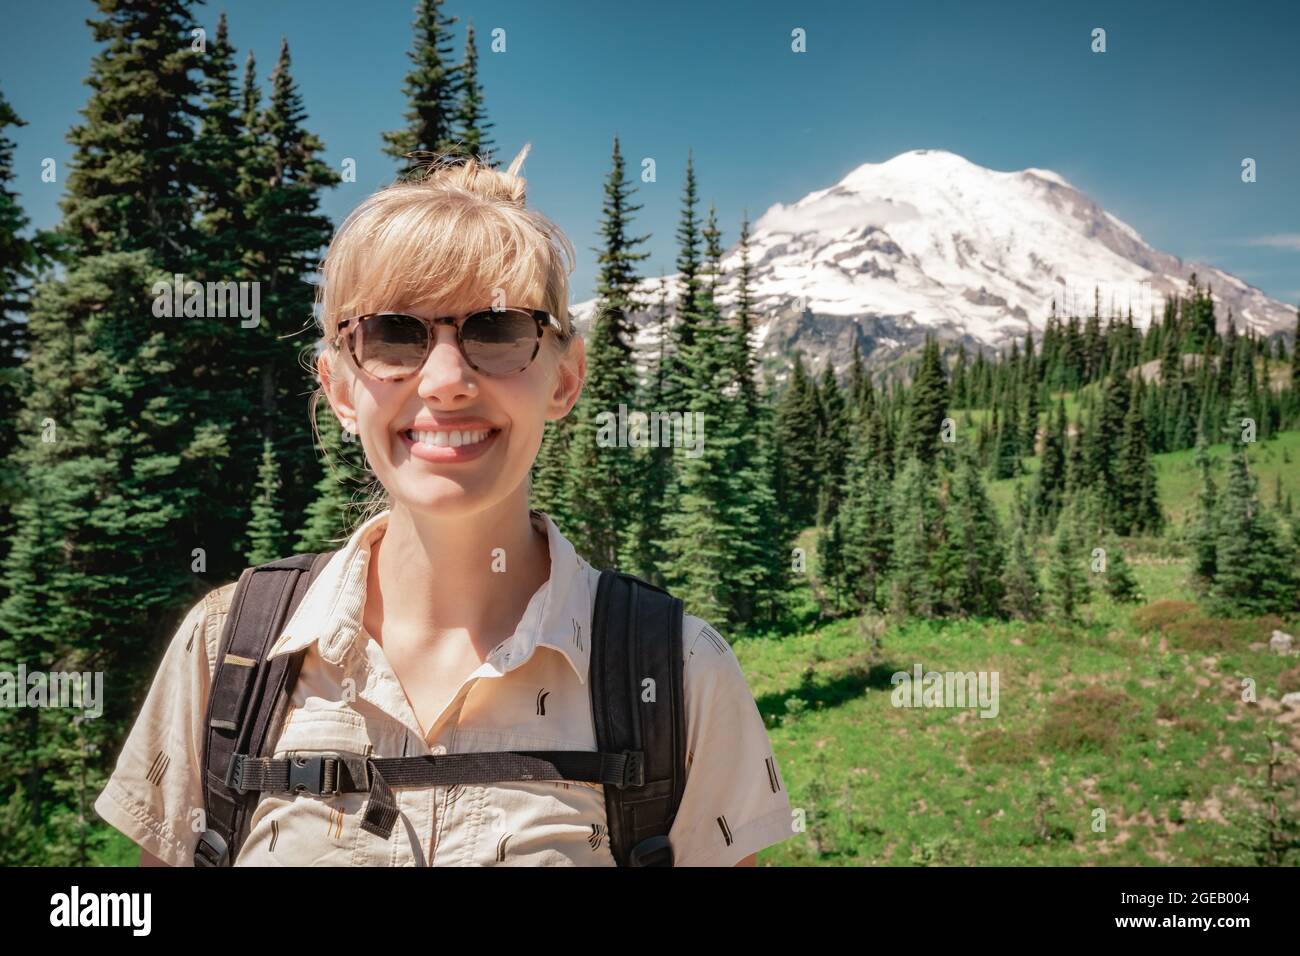 Young woman smiling in front of Mt Rainier on the Naches Peak Loop Trail in Mt. Rainier National Park. Stock Photo